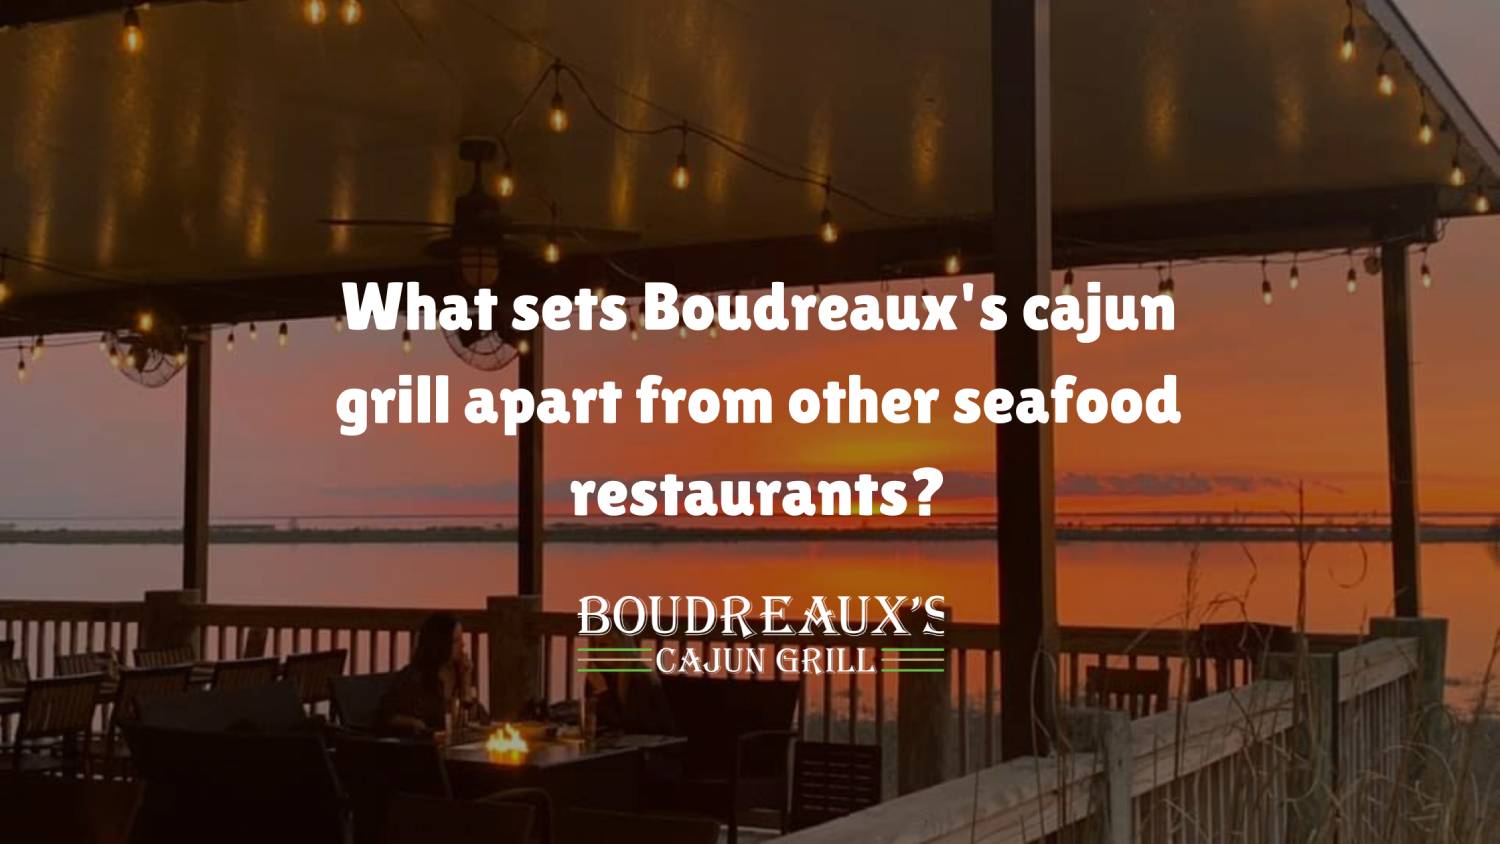 What sets Boudreaux's cajun grill apart from other seafood restaurants?